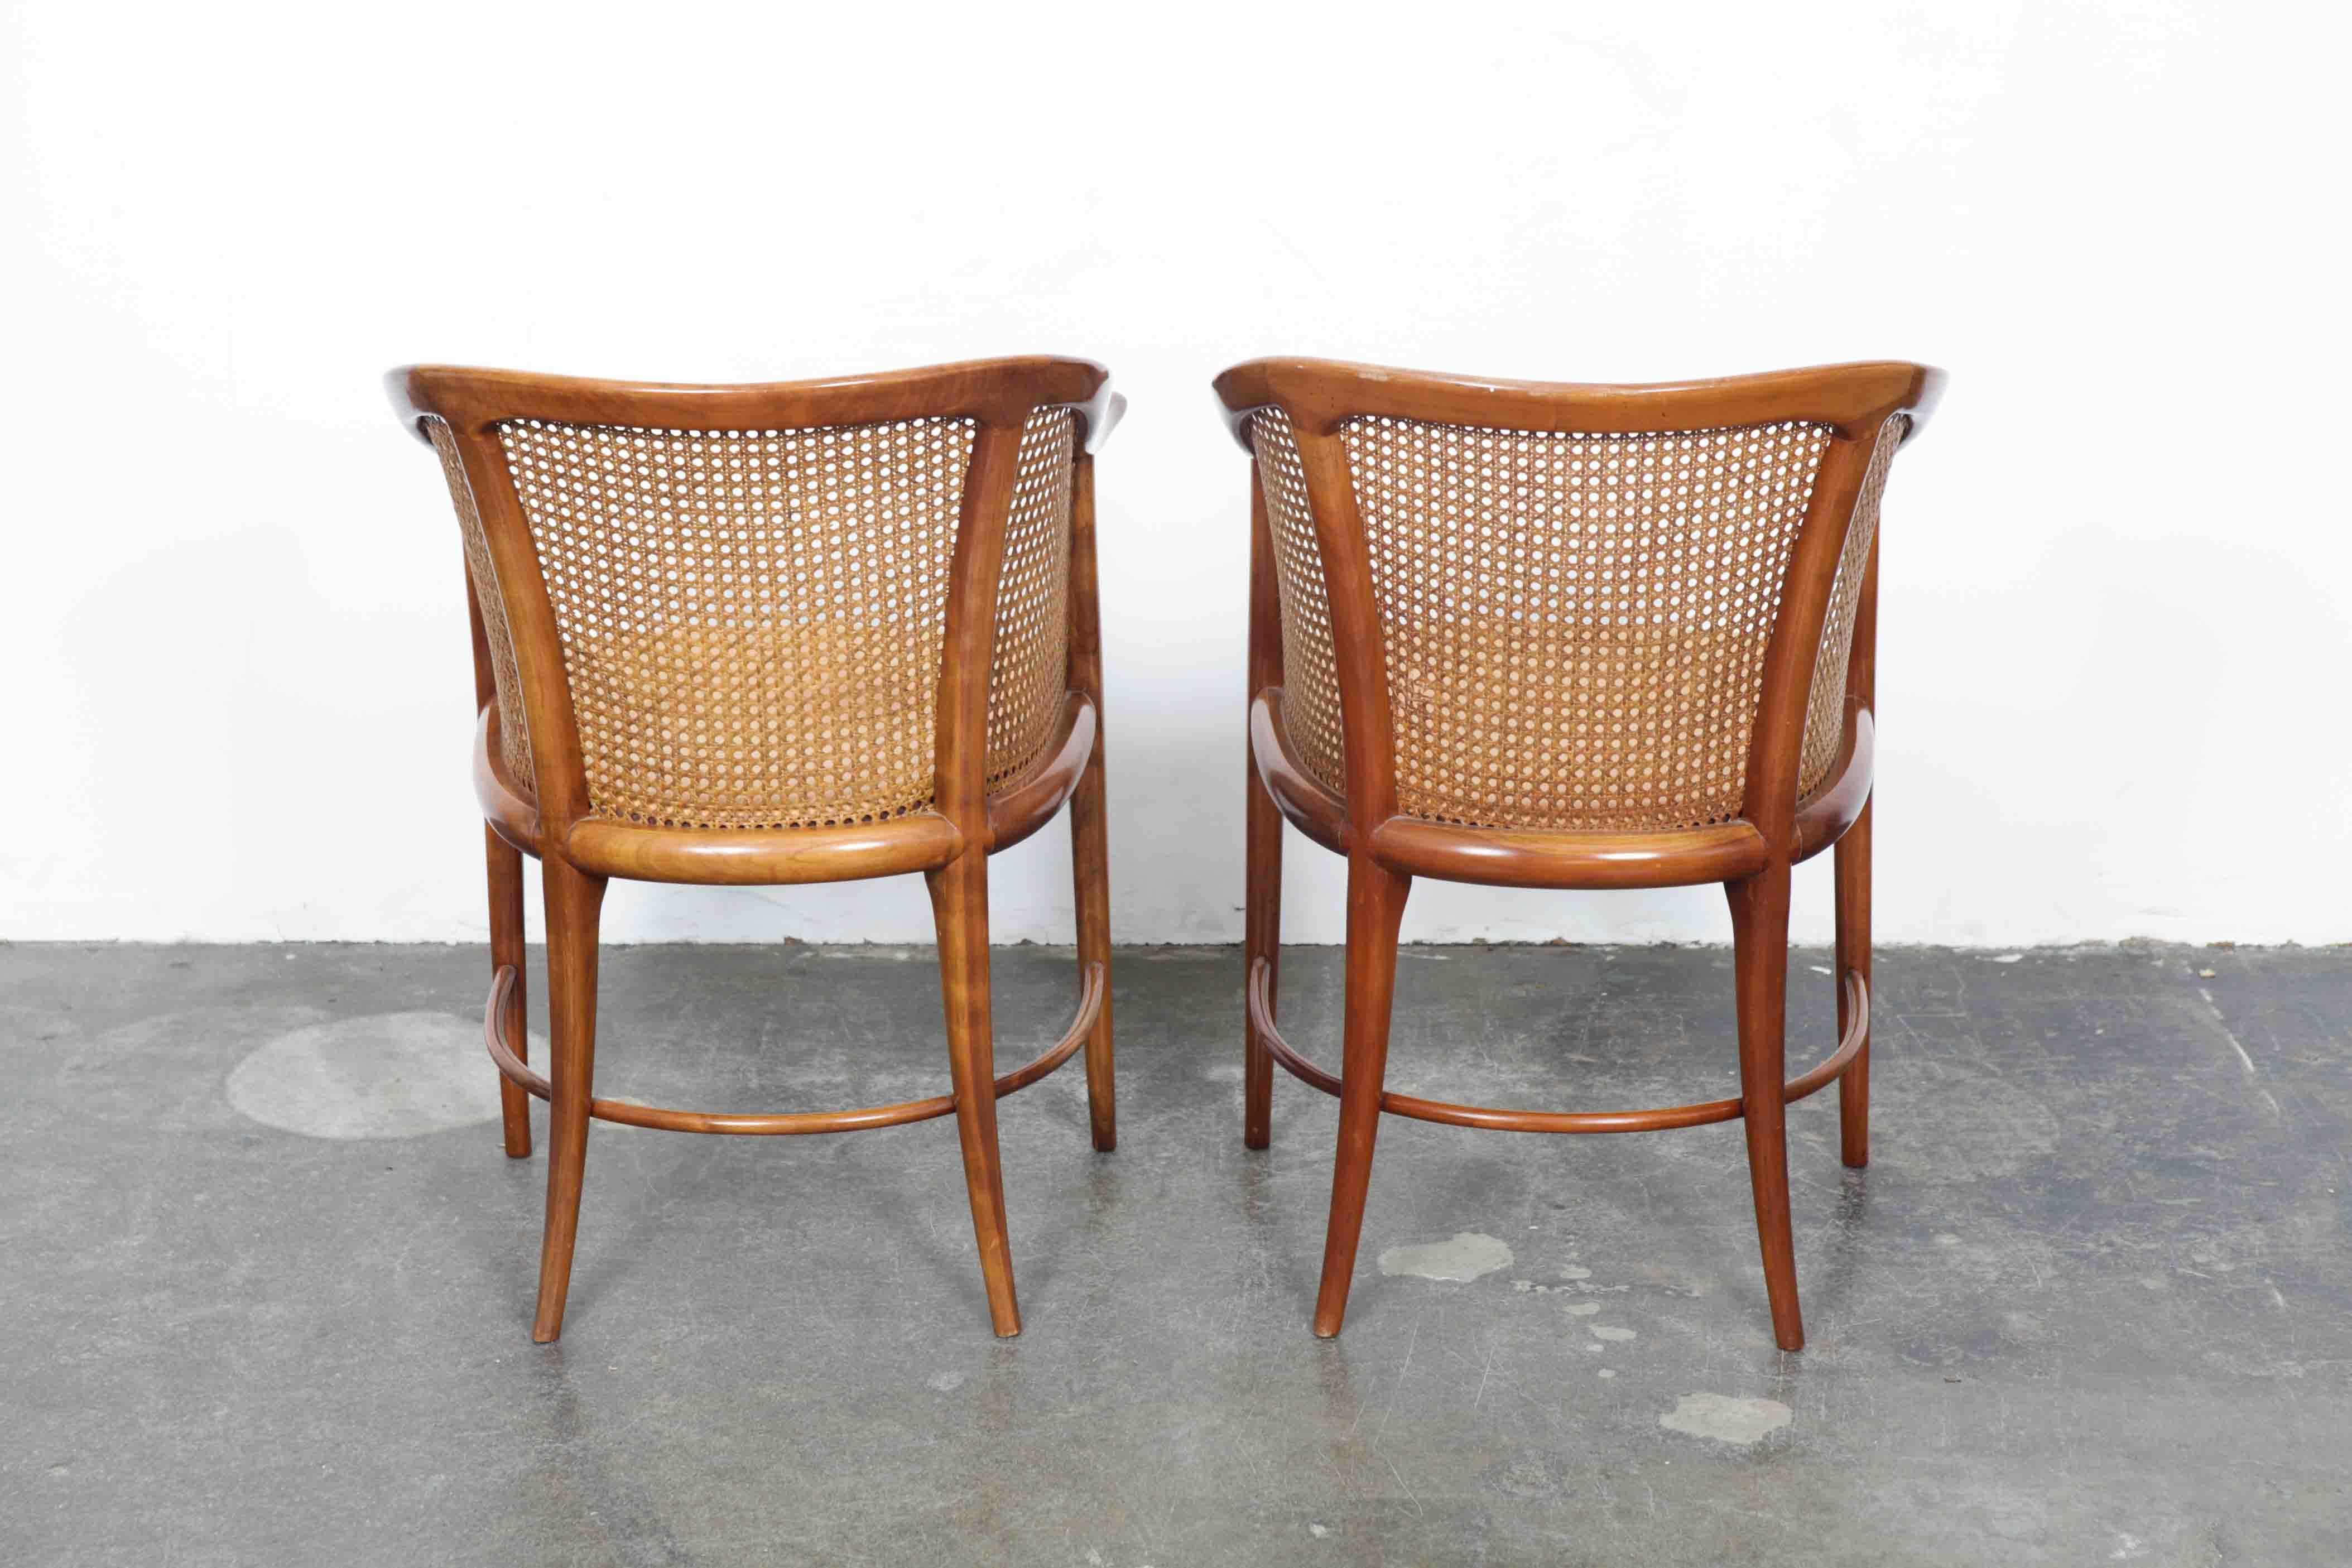 Pair of Cane and Leather Italian Chairs with Cherrywood Frames (Italienisch)